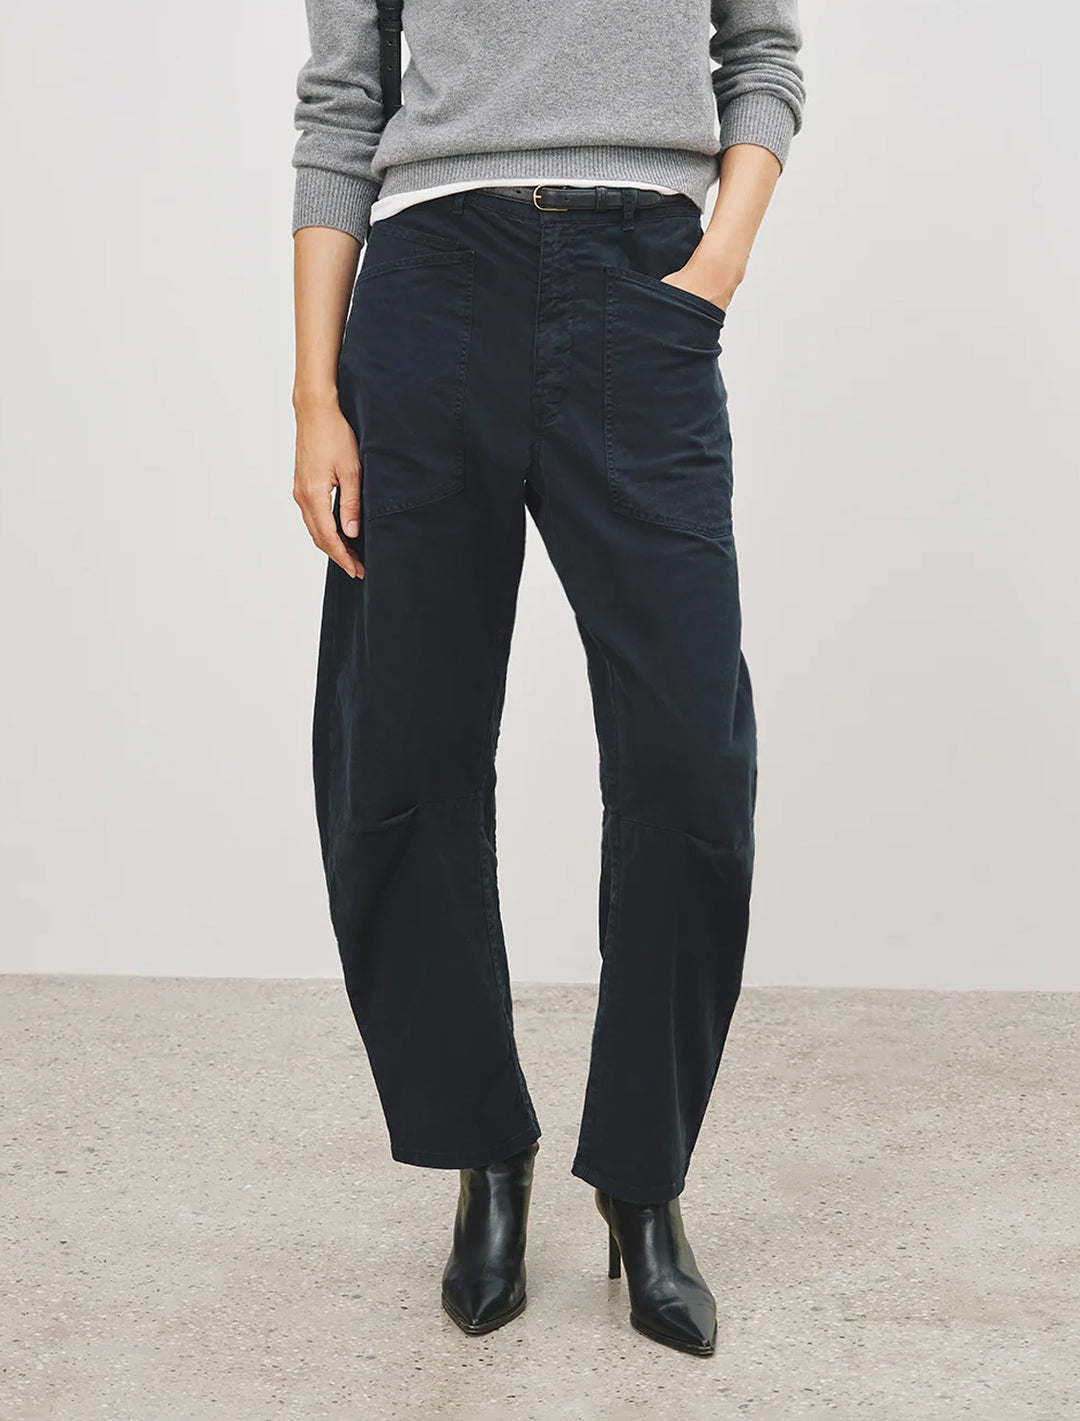 shon pant in midnight